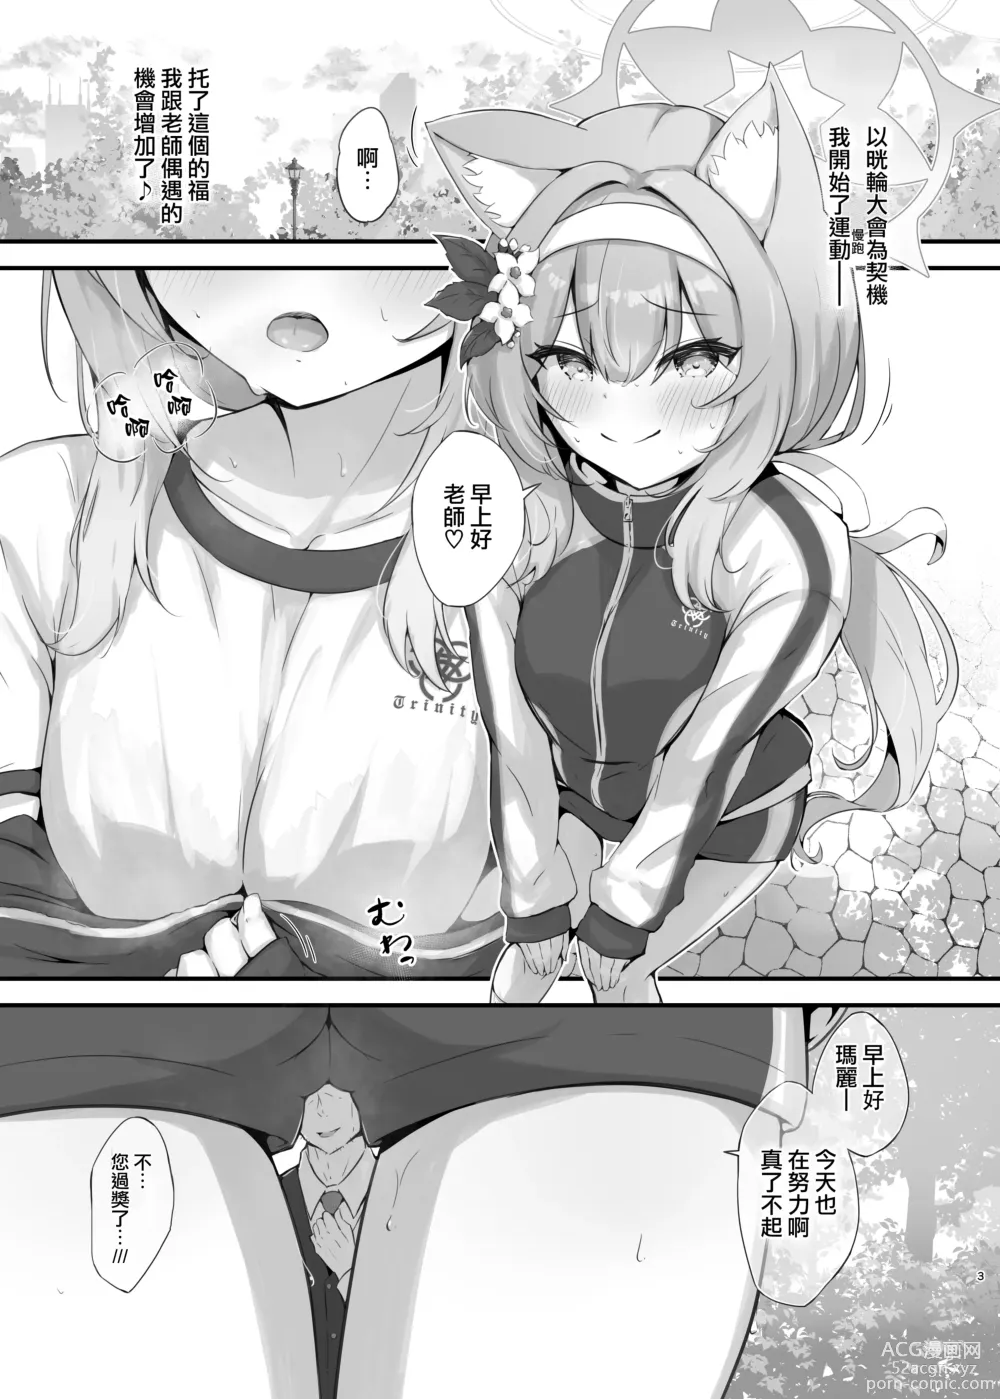 Page 4 of doujinshi 吸瑪麗